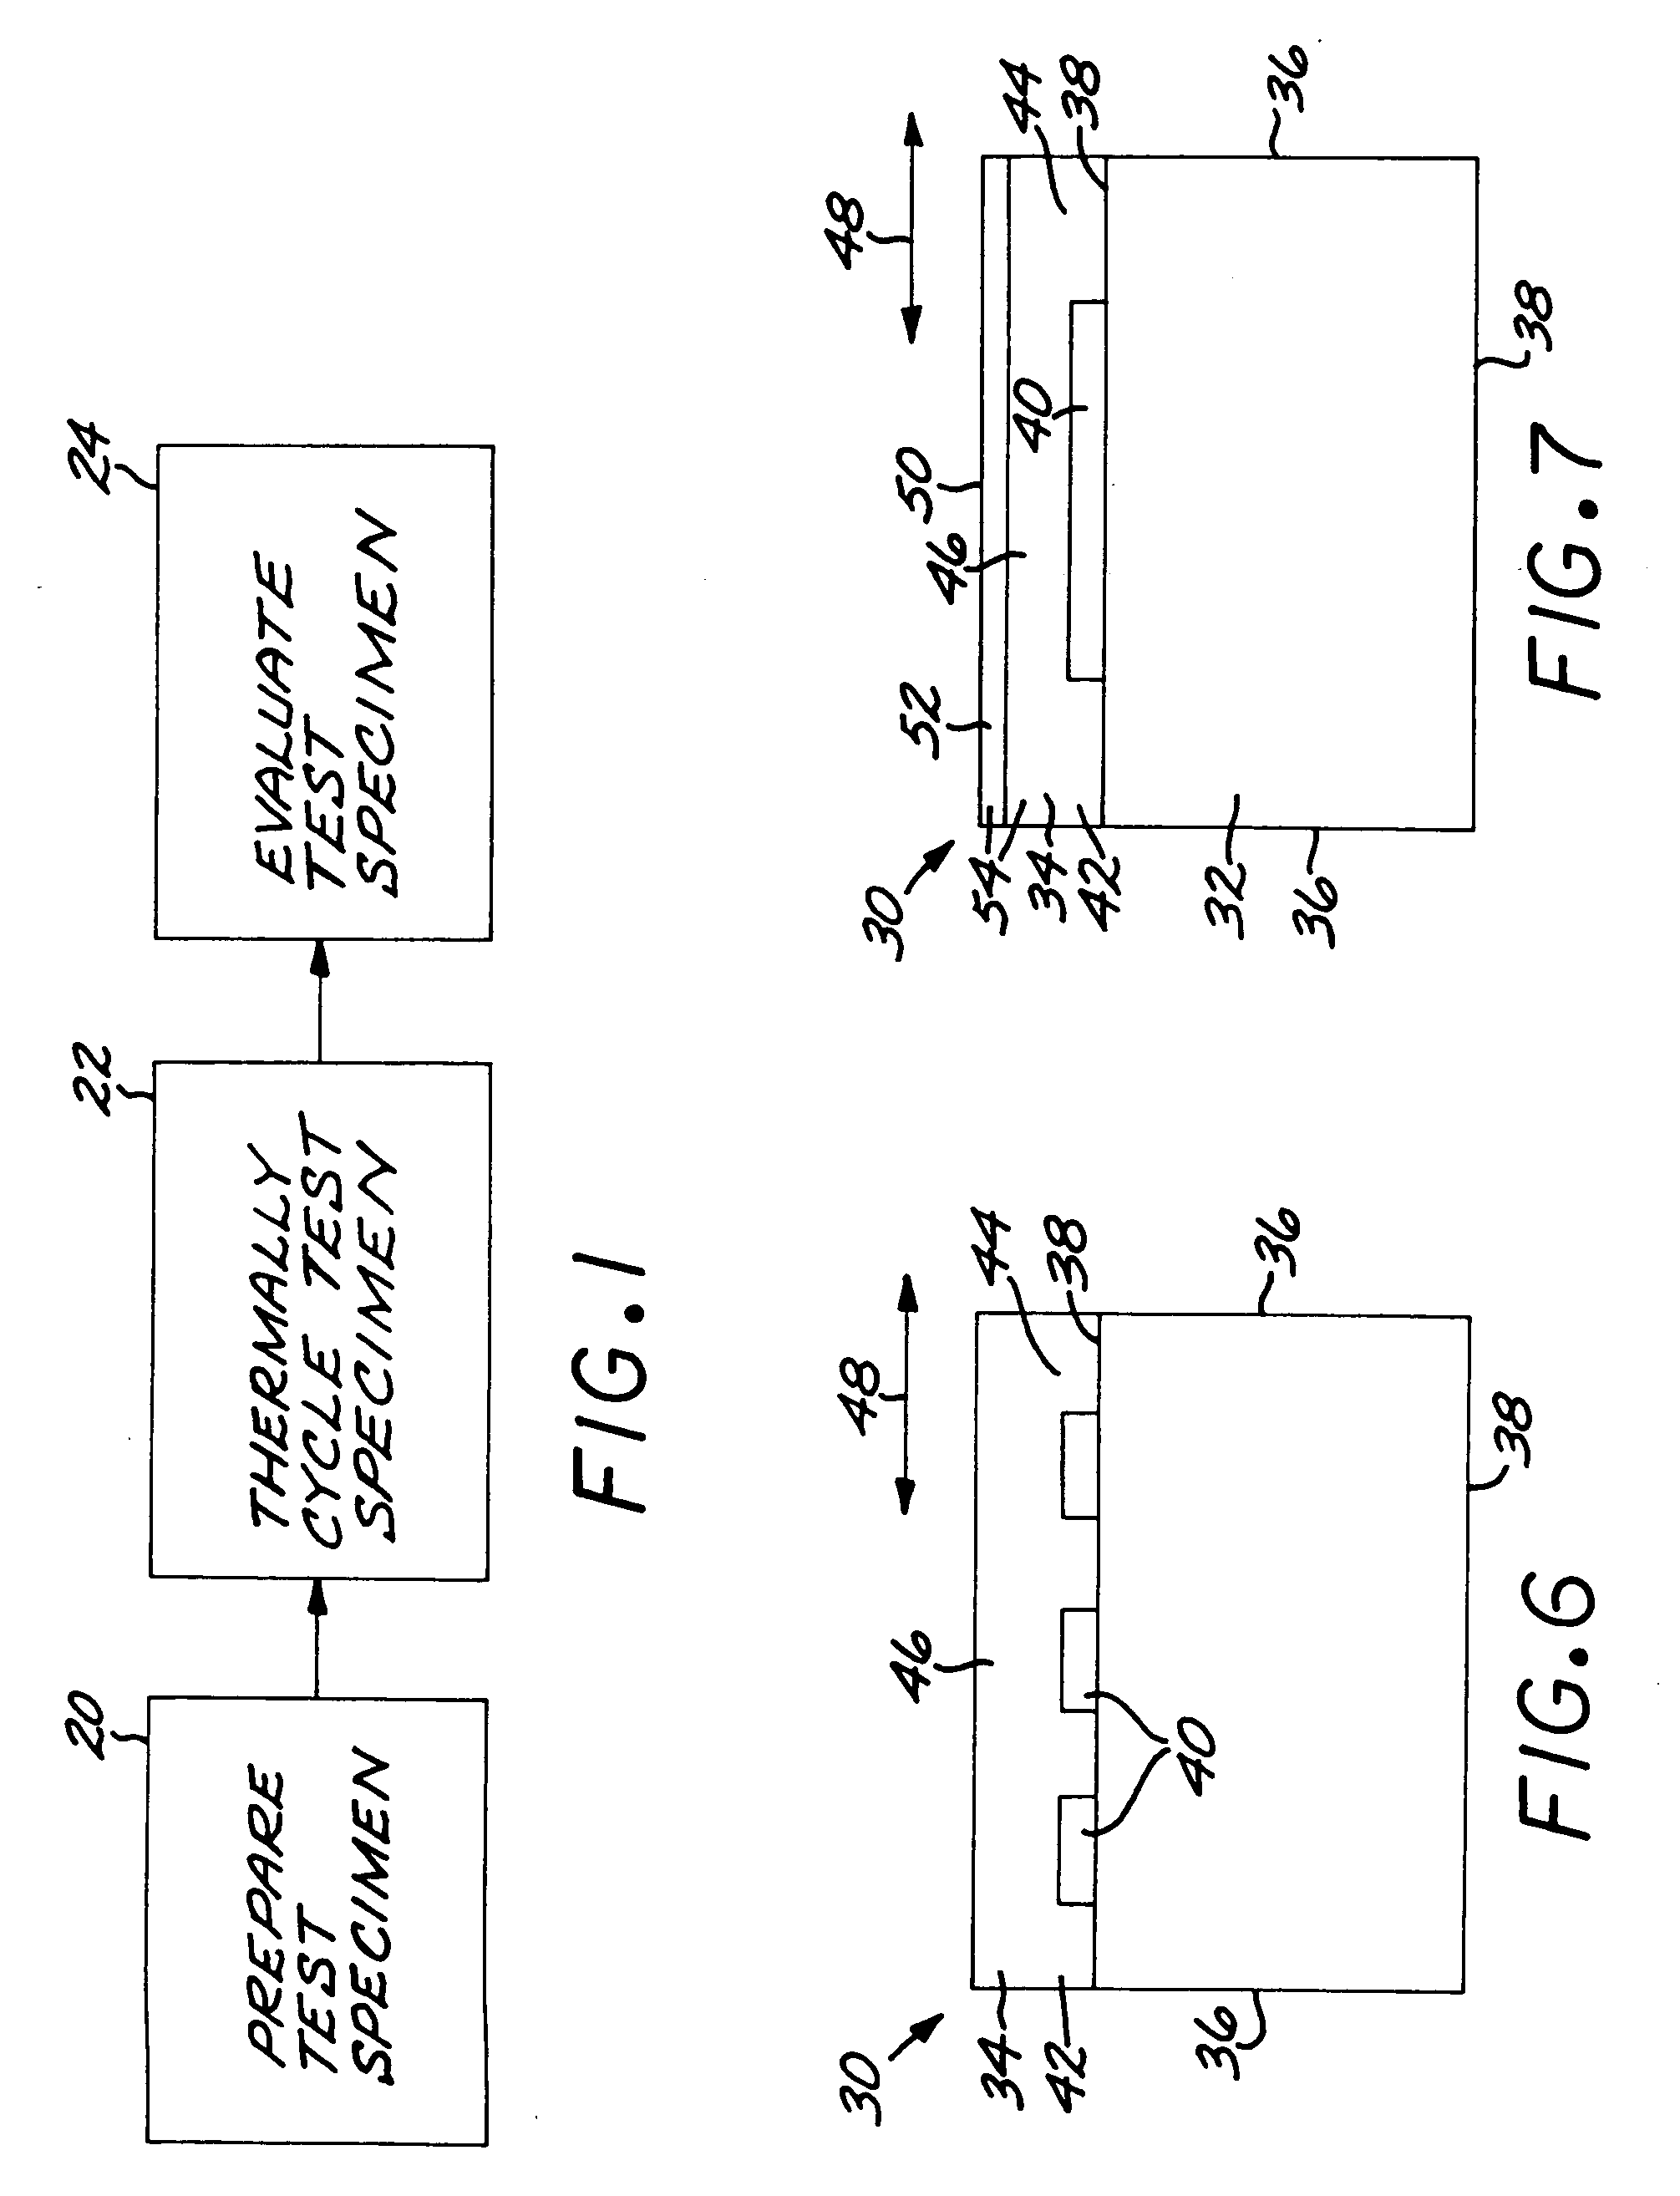 Test method for assessing thermal mechanical fatigue performance of a test material